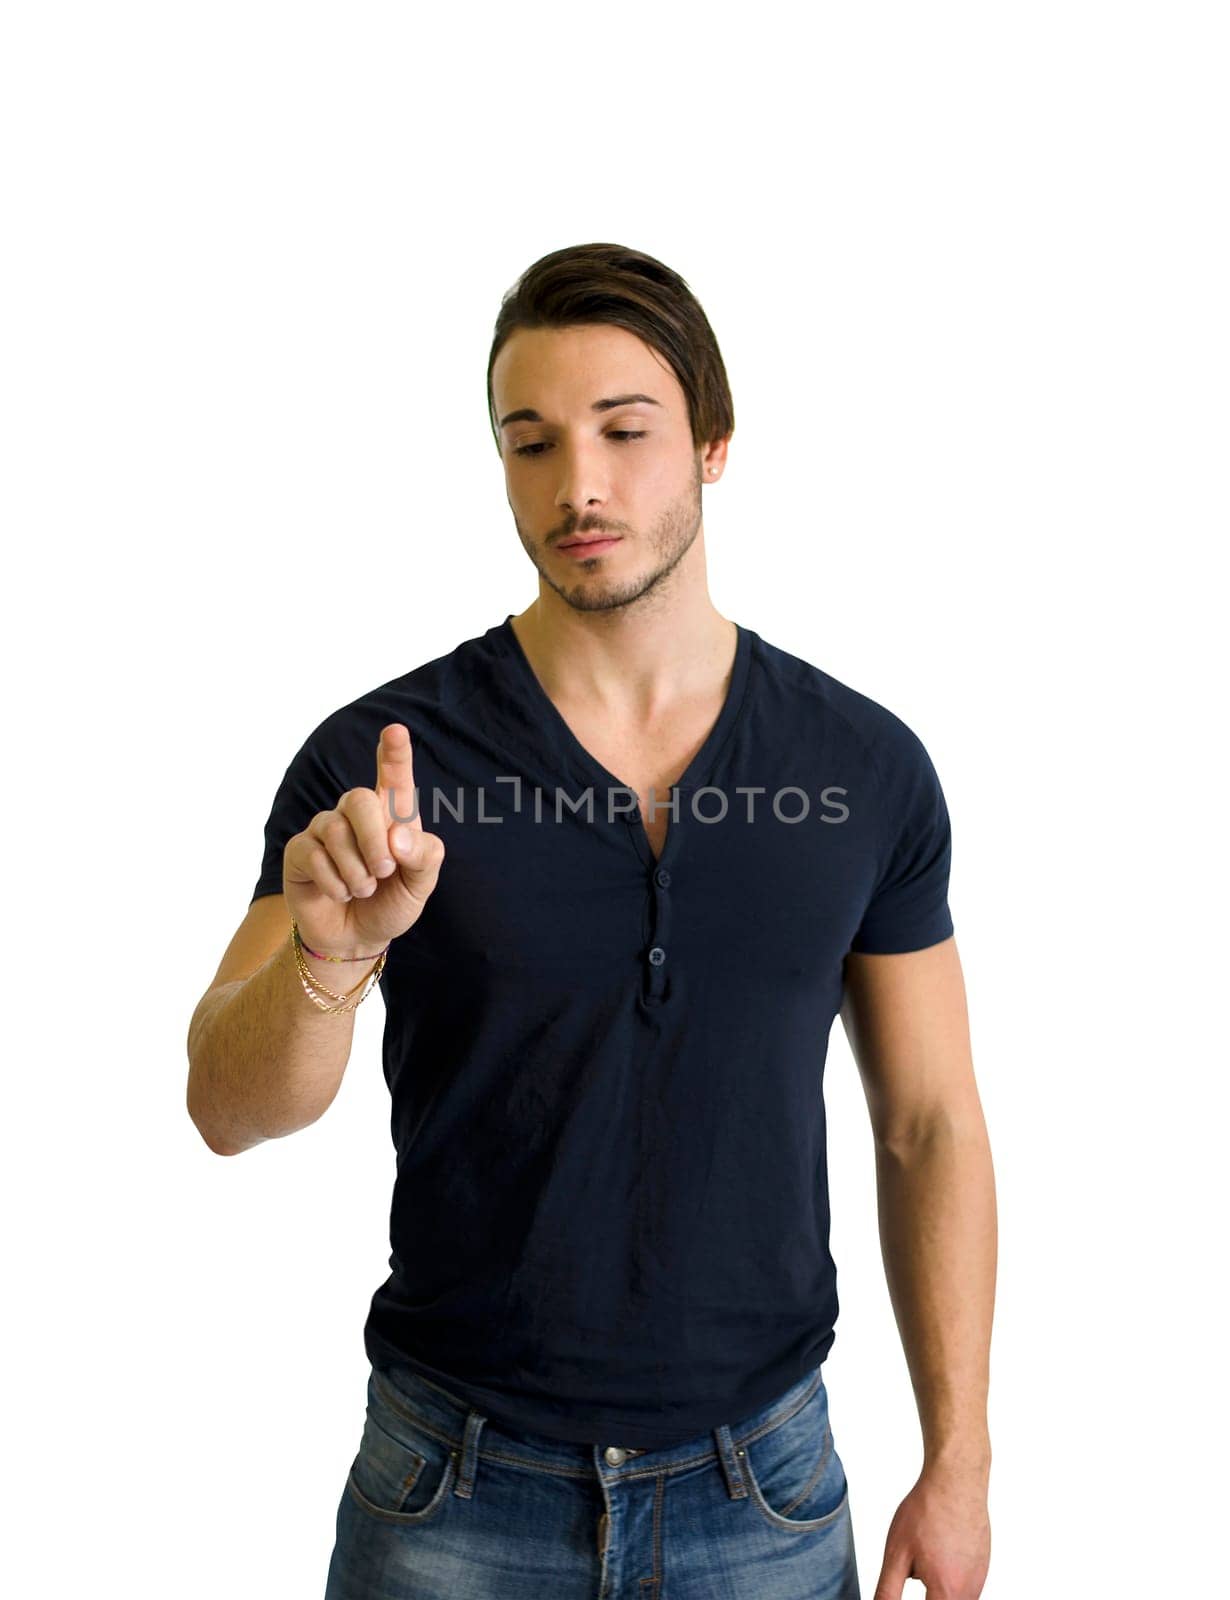 A man in a black shirt pointing at something, as if he's clicking an invisible button